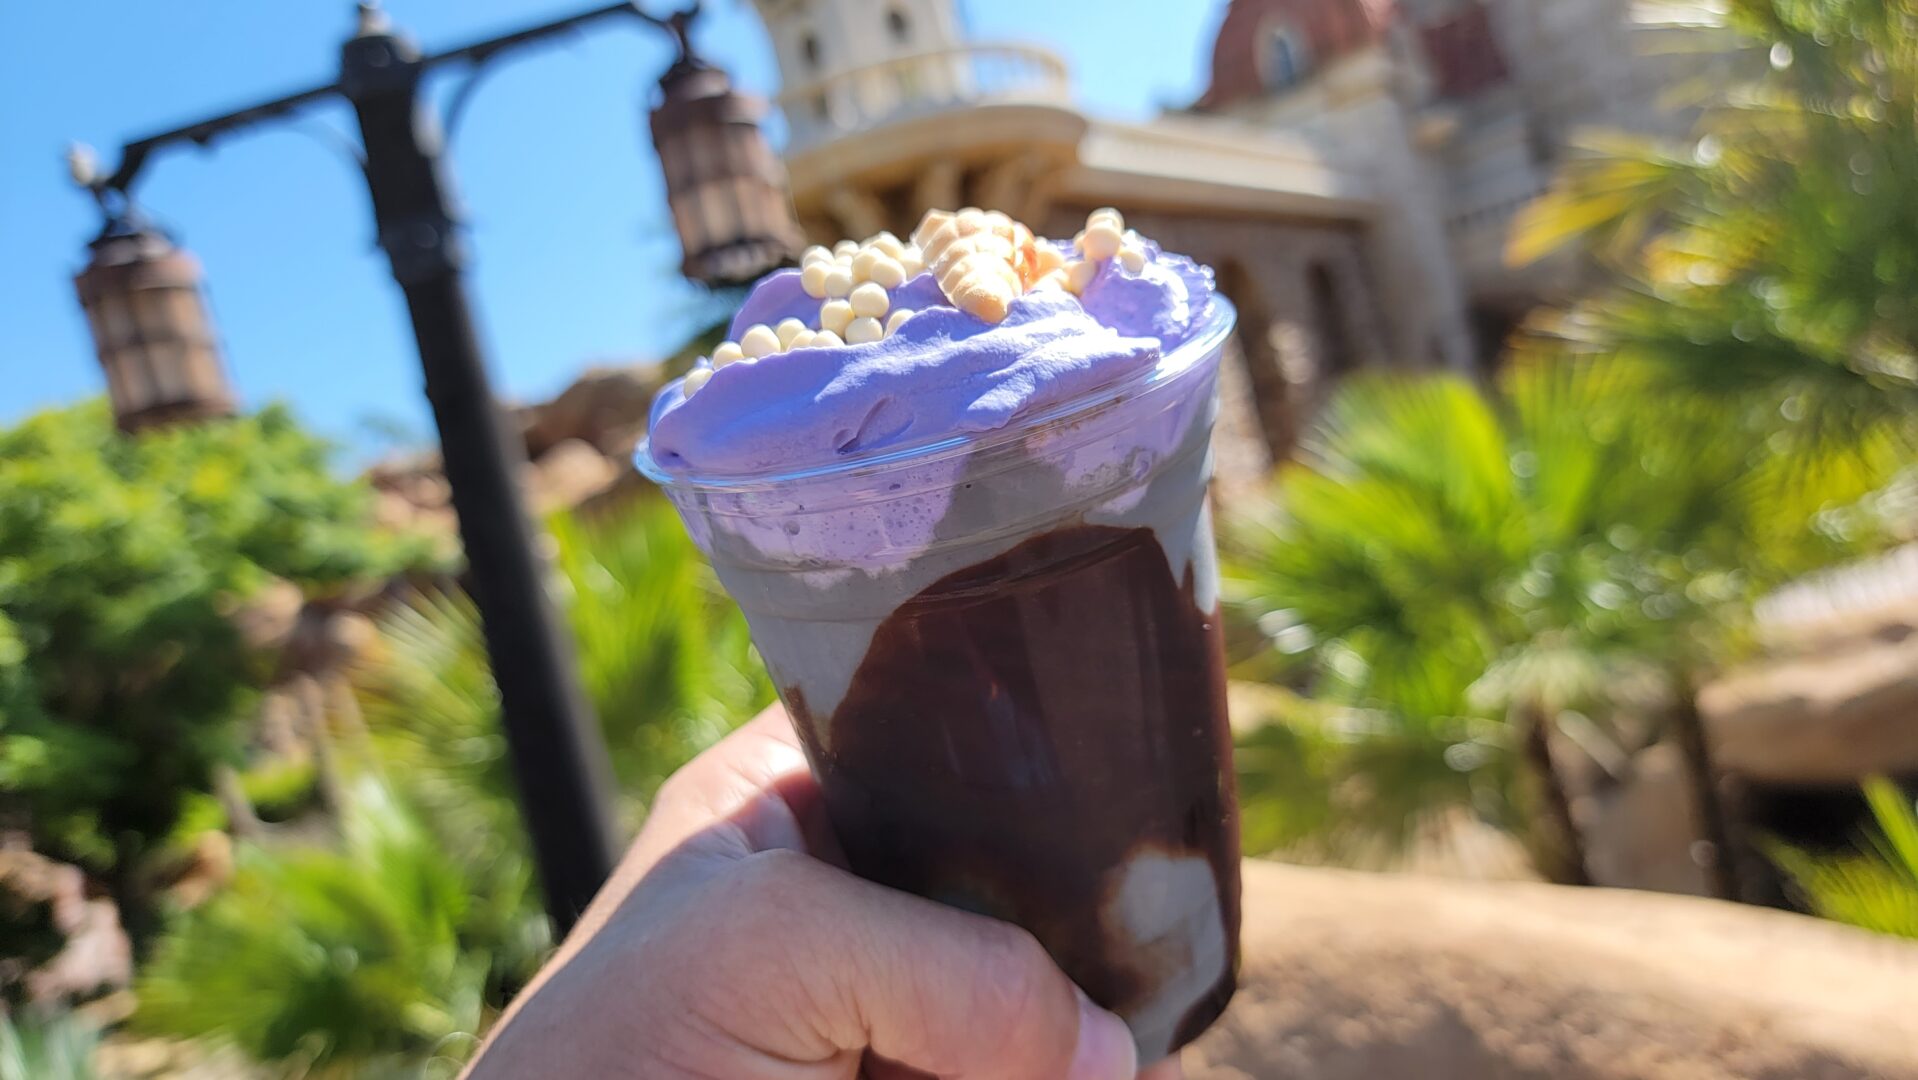 Divinely Diabolical Little Mermaid Shake is a New Twist on a Classic Favorite